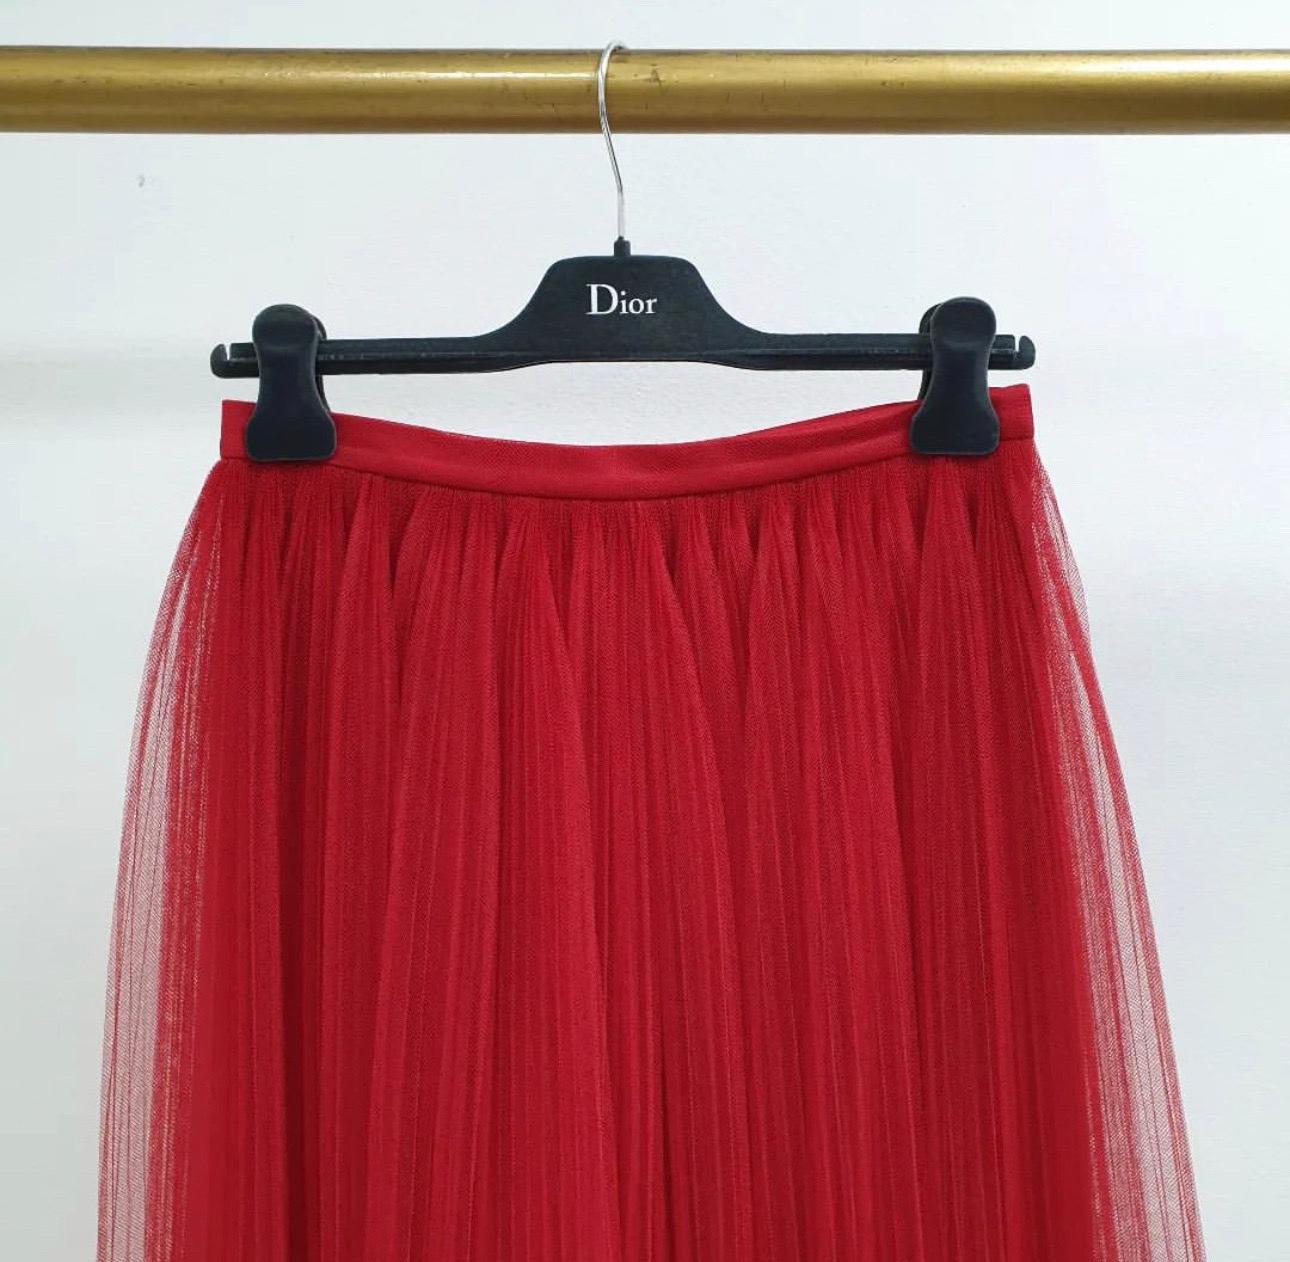 Take a more trendy approach towards fashion with this attractive skirt from Christian Dior!
 This red midi skirt is made of quality fabrics and features a gathered silhouette. 
Pair it with a simple top and ballet flats for a fashionable day out.